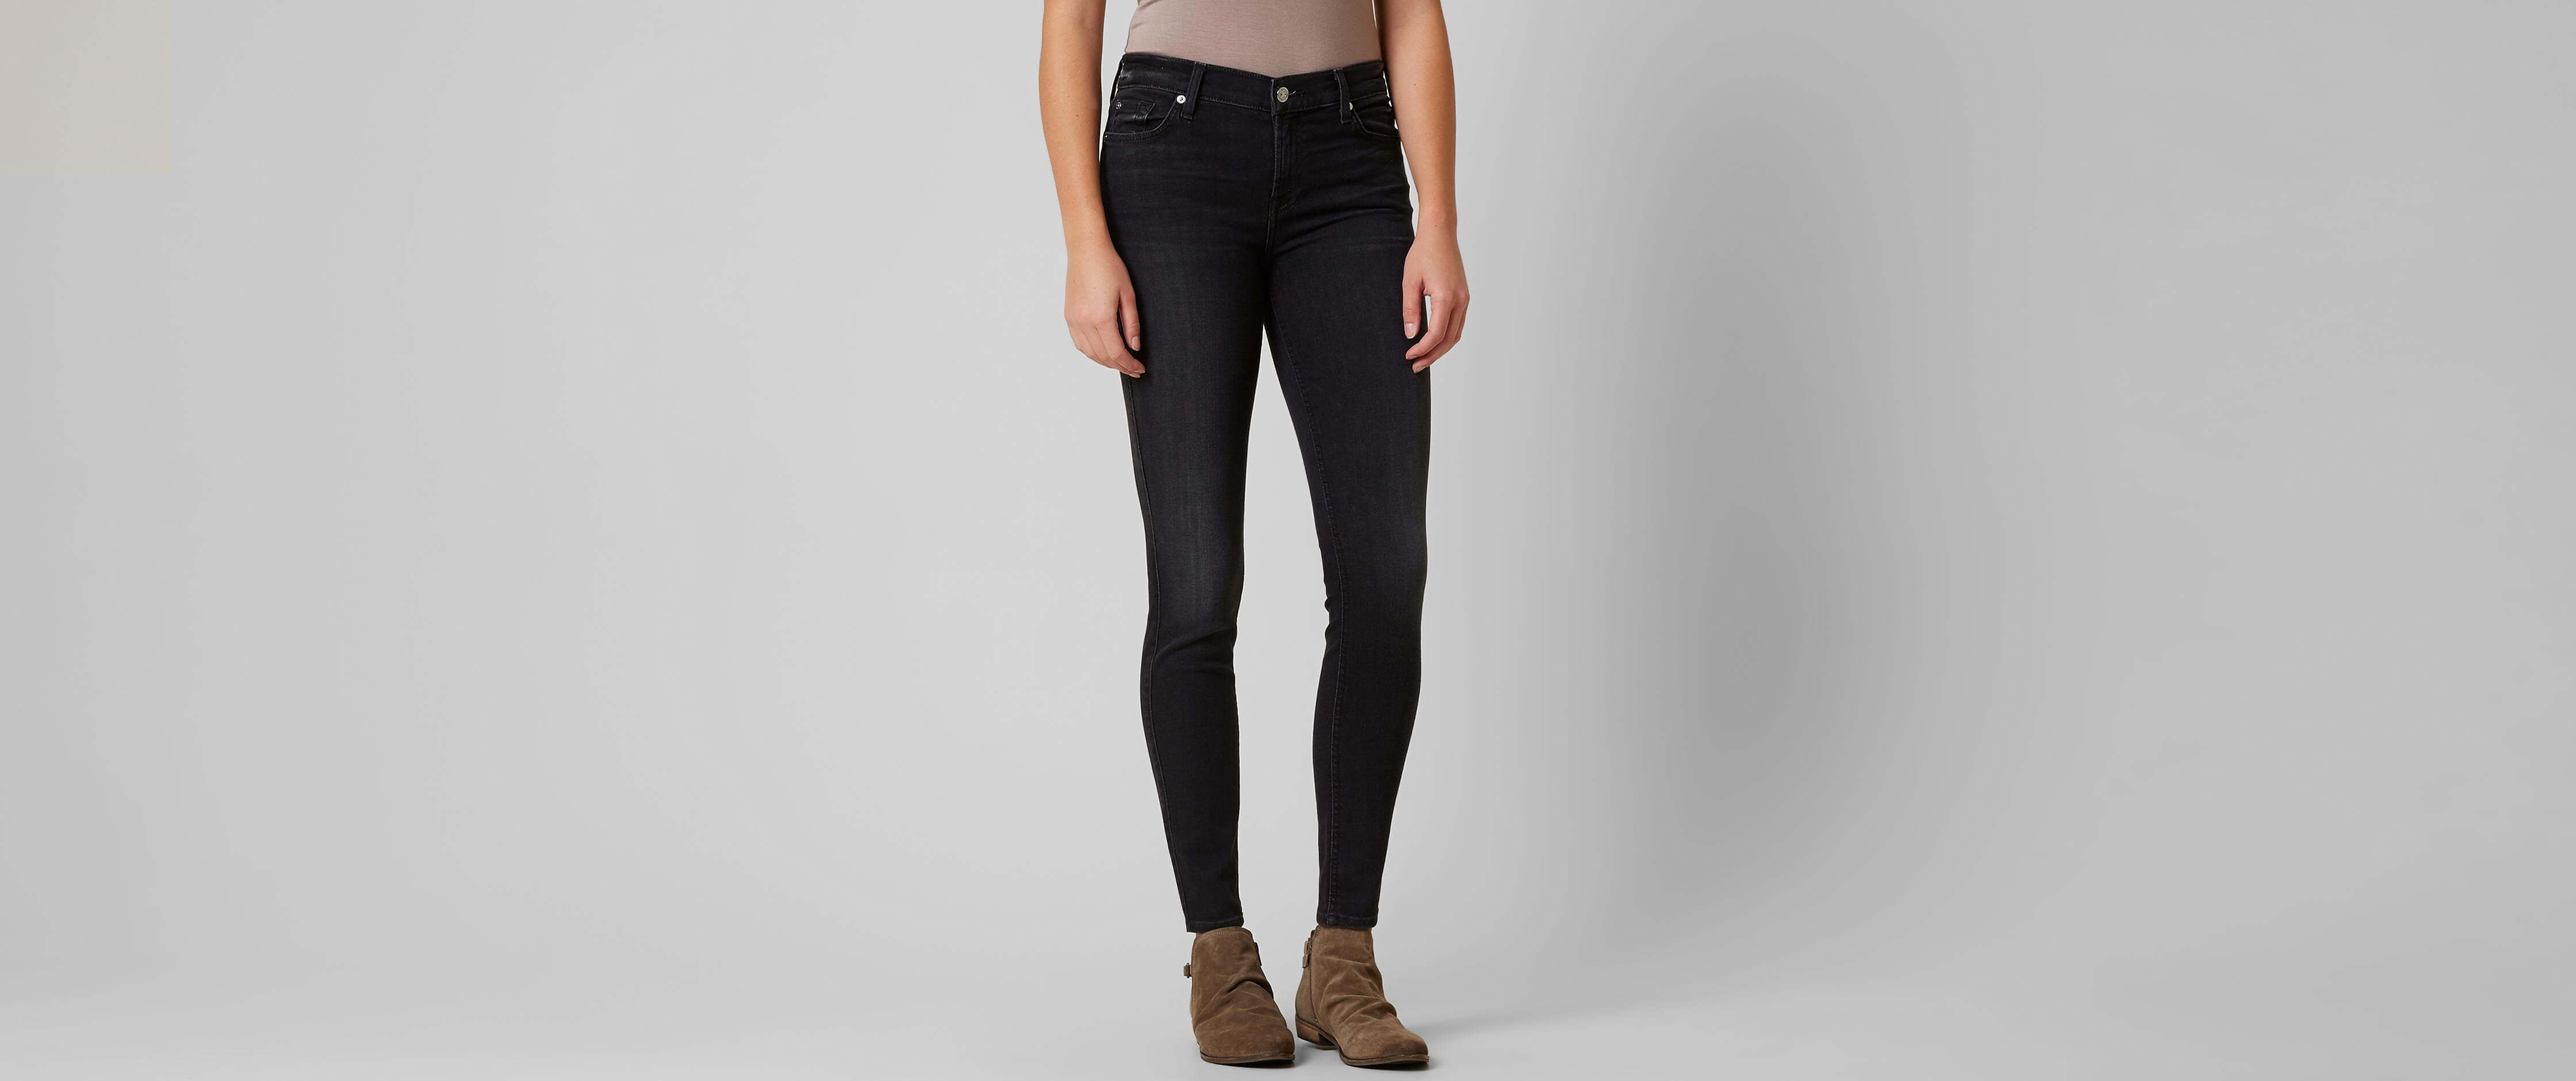 7 for all mankind jeans canada